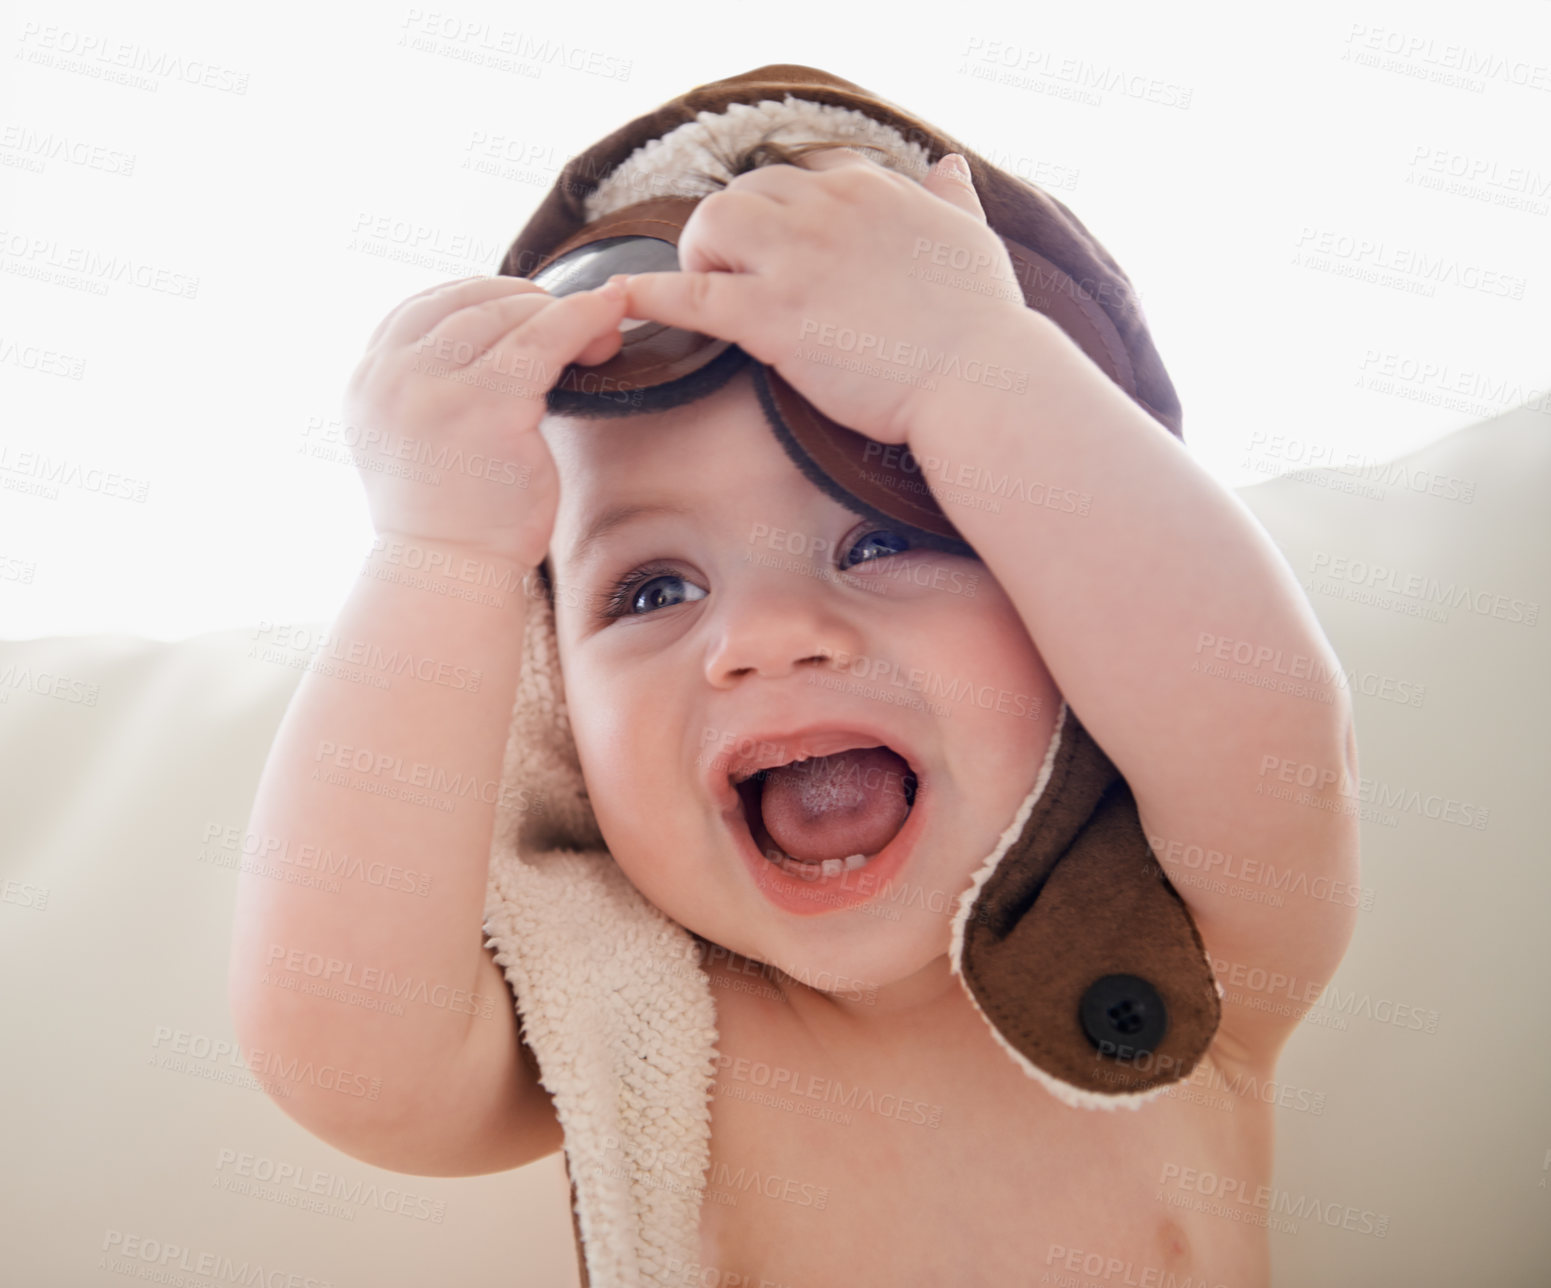 Buy stock photo Baby, hat and happy playing or home with laughing for childhood development with curiosity, costume or growing. Kid, accessories and joy in apartment on sofa in Canada or weekend, innocent or cute